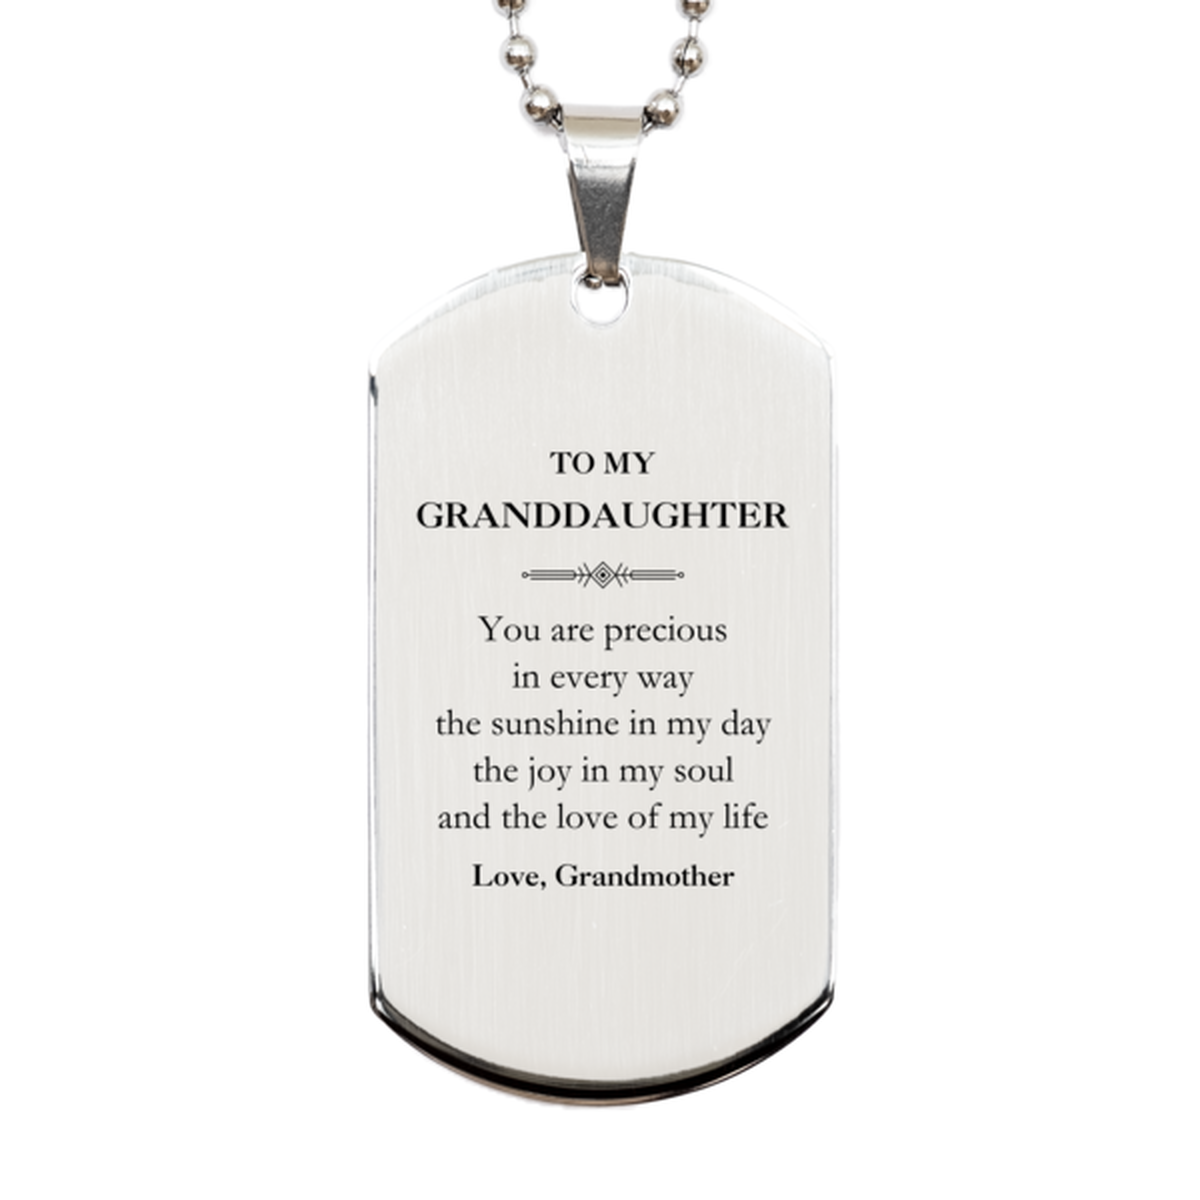 Graduation Gifts for Granddaughter Silver Dog Tag Present from Grandmother, Christmas Granddaughter Birthday Gifts Granddaughter You are precious in every way the sunshine in my day. Love, Grandmother